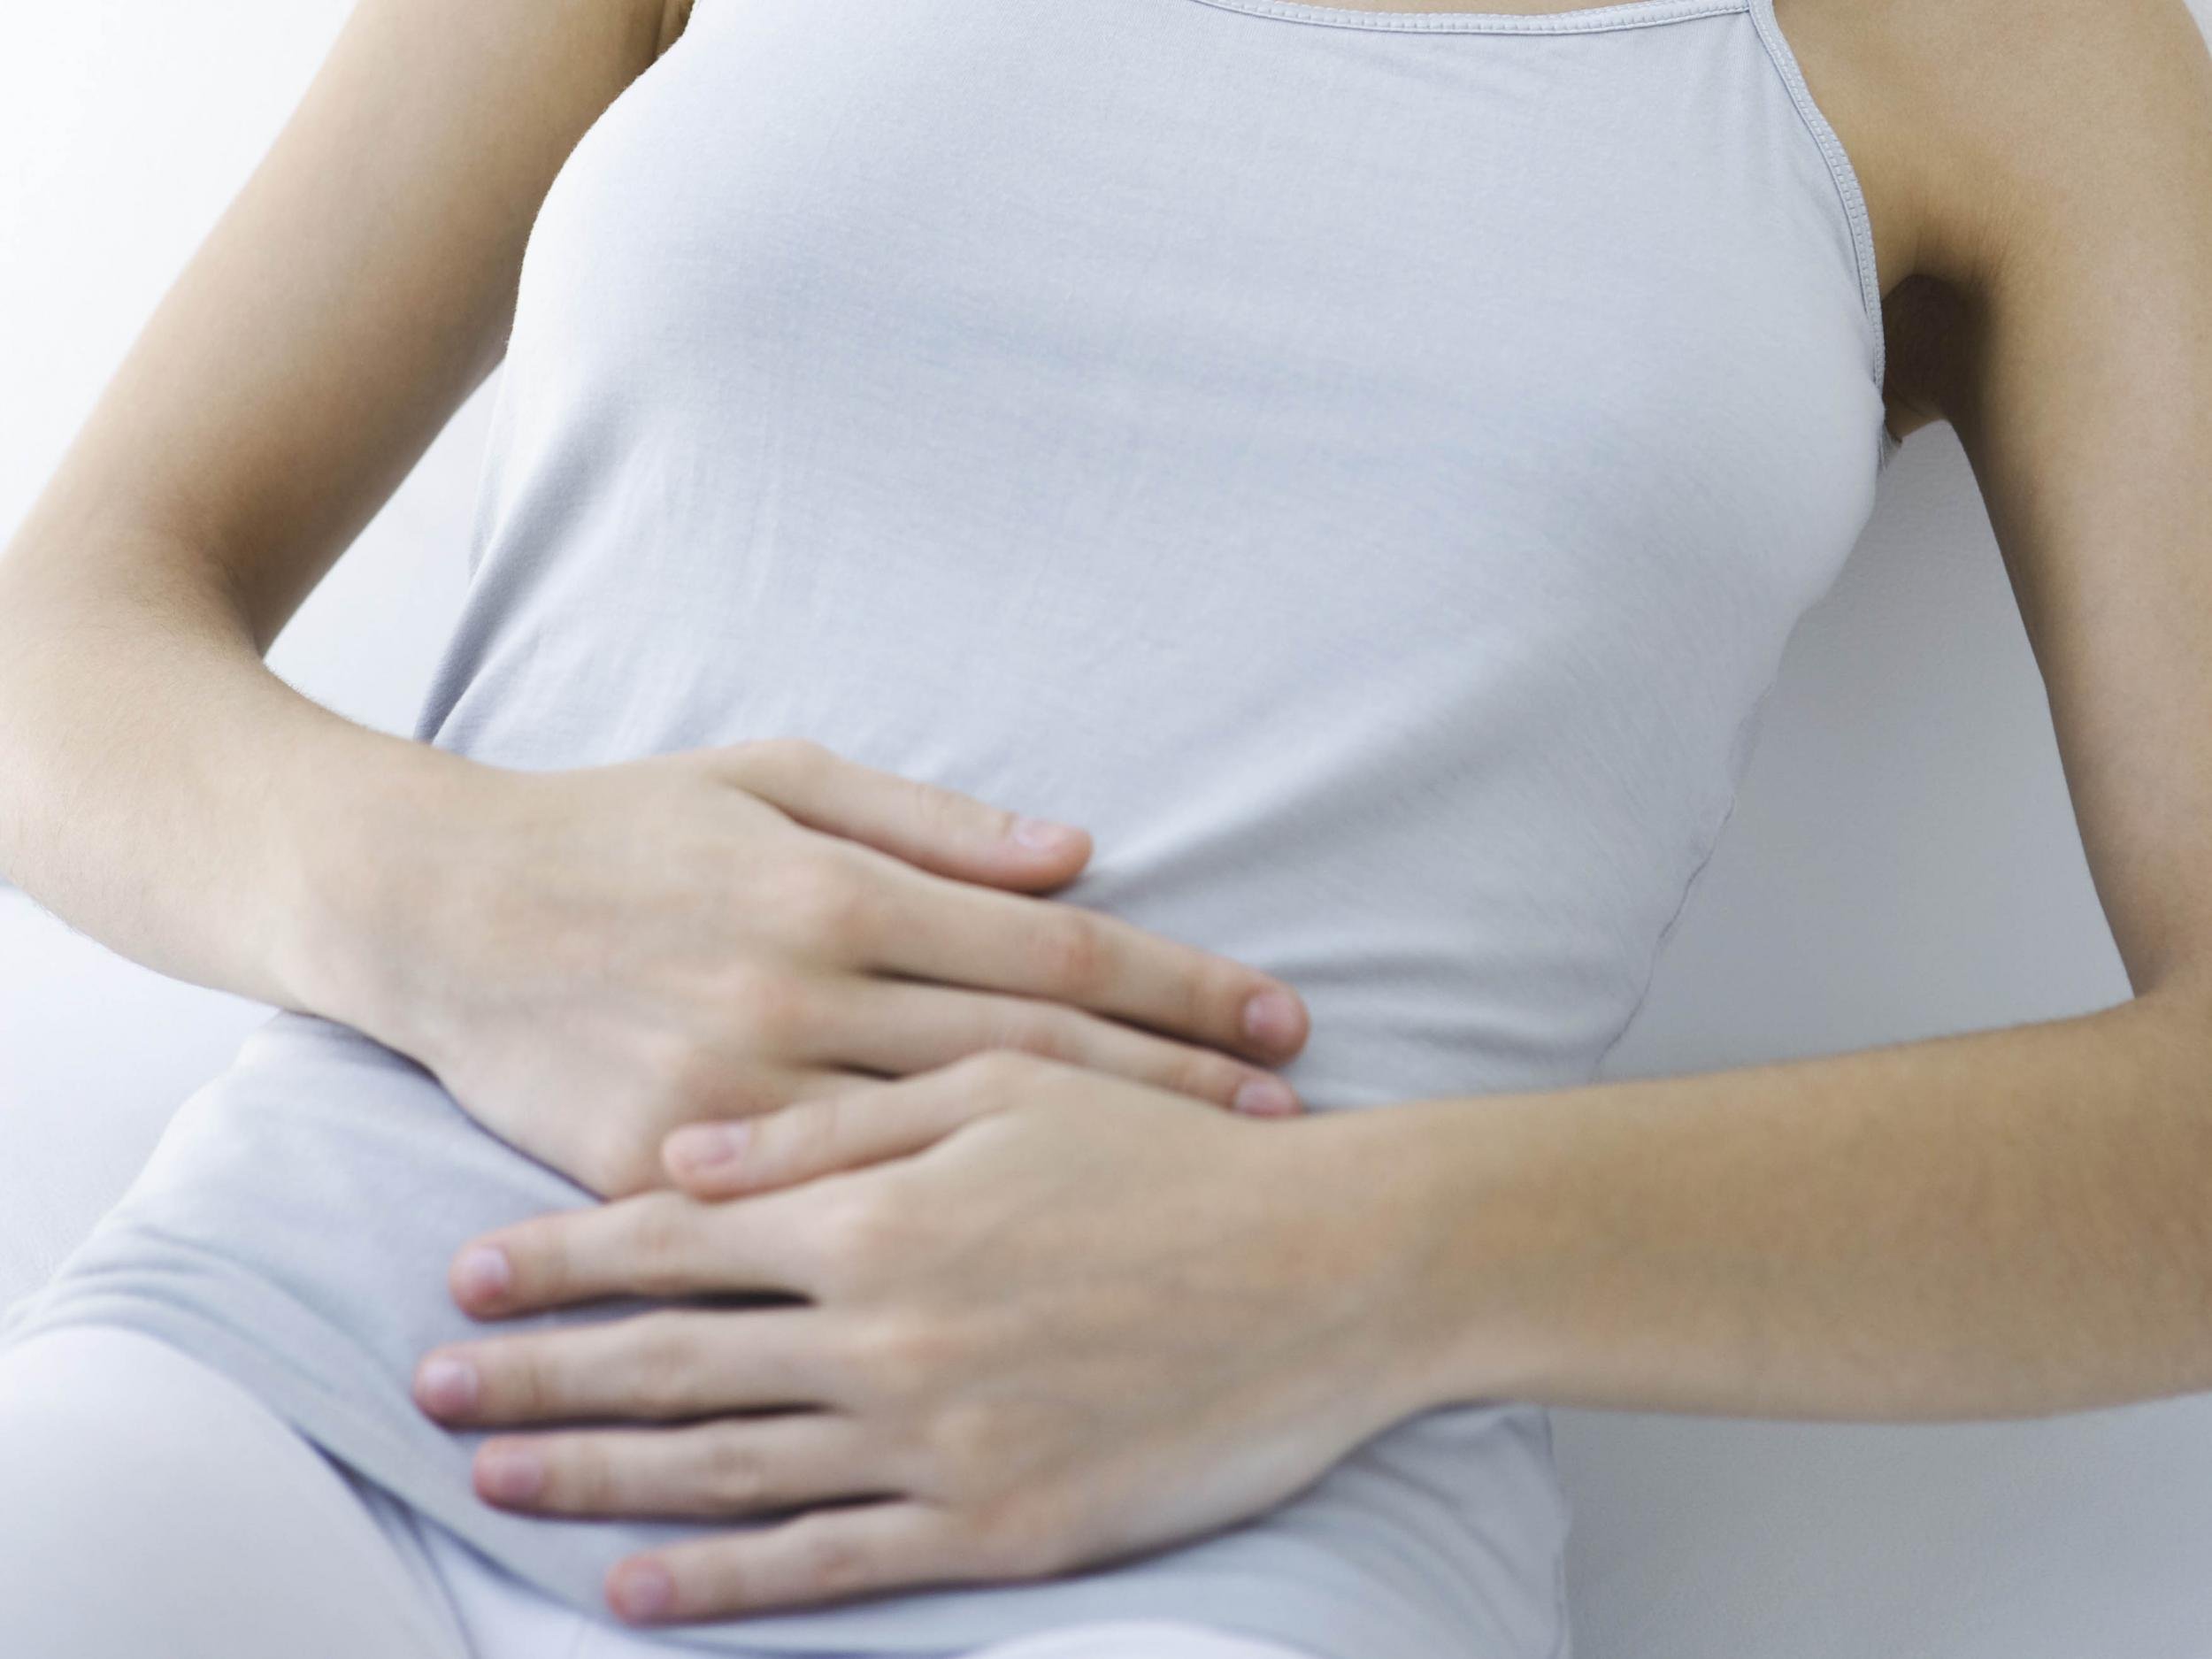 Menstrual cramps can be painful as heart attack, study says